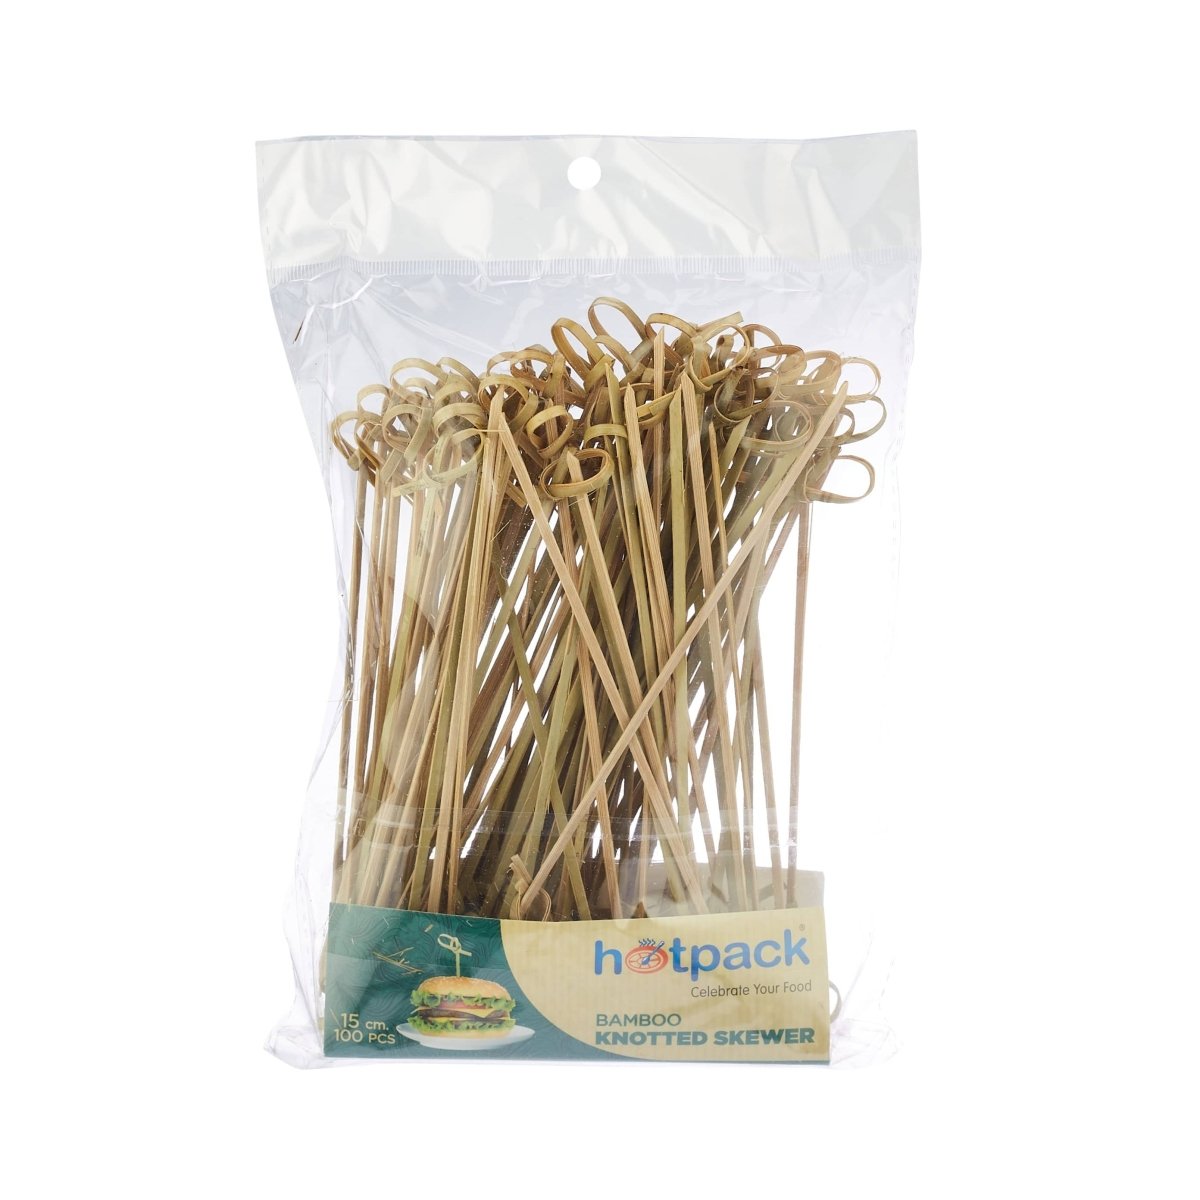 15 cm Disposable Bamboo Knotted Skewer - hotpackwebstore.com - Bamboo Skewer